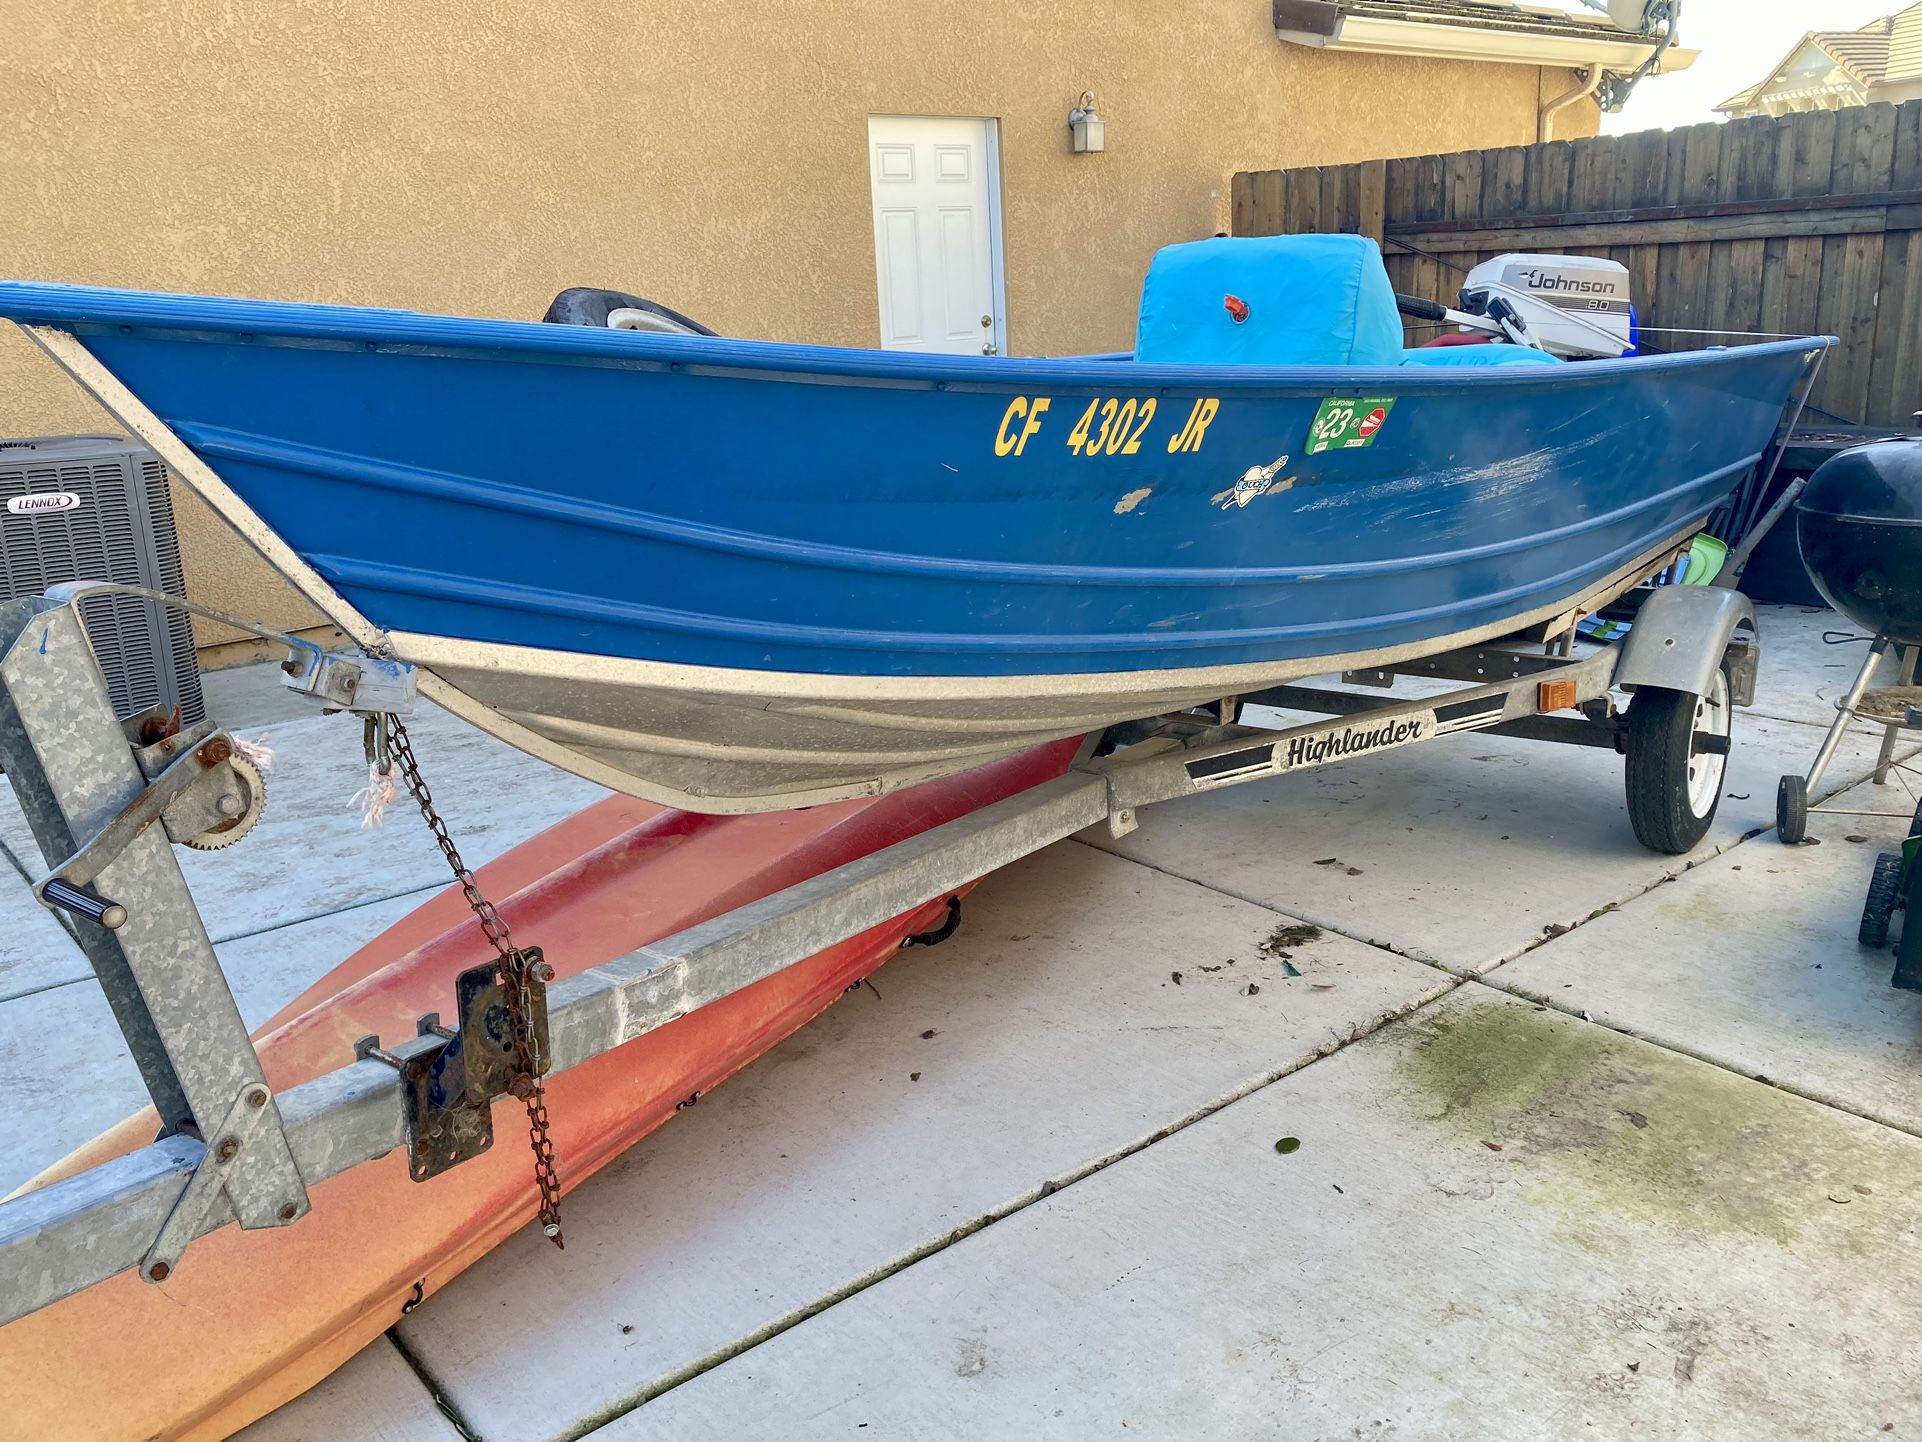 12’ Aluminum Trailered Boat with 8hp Motor